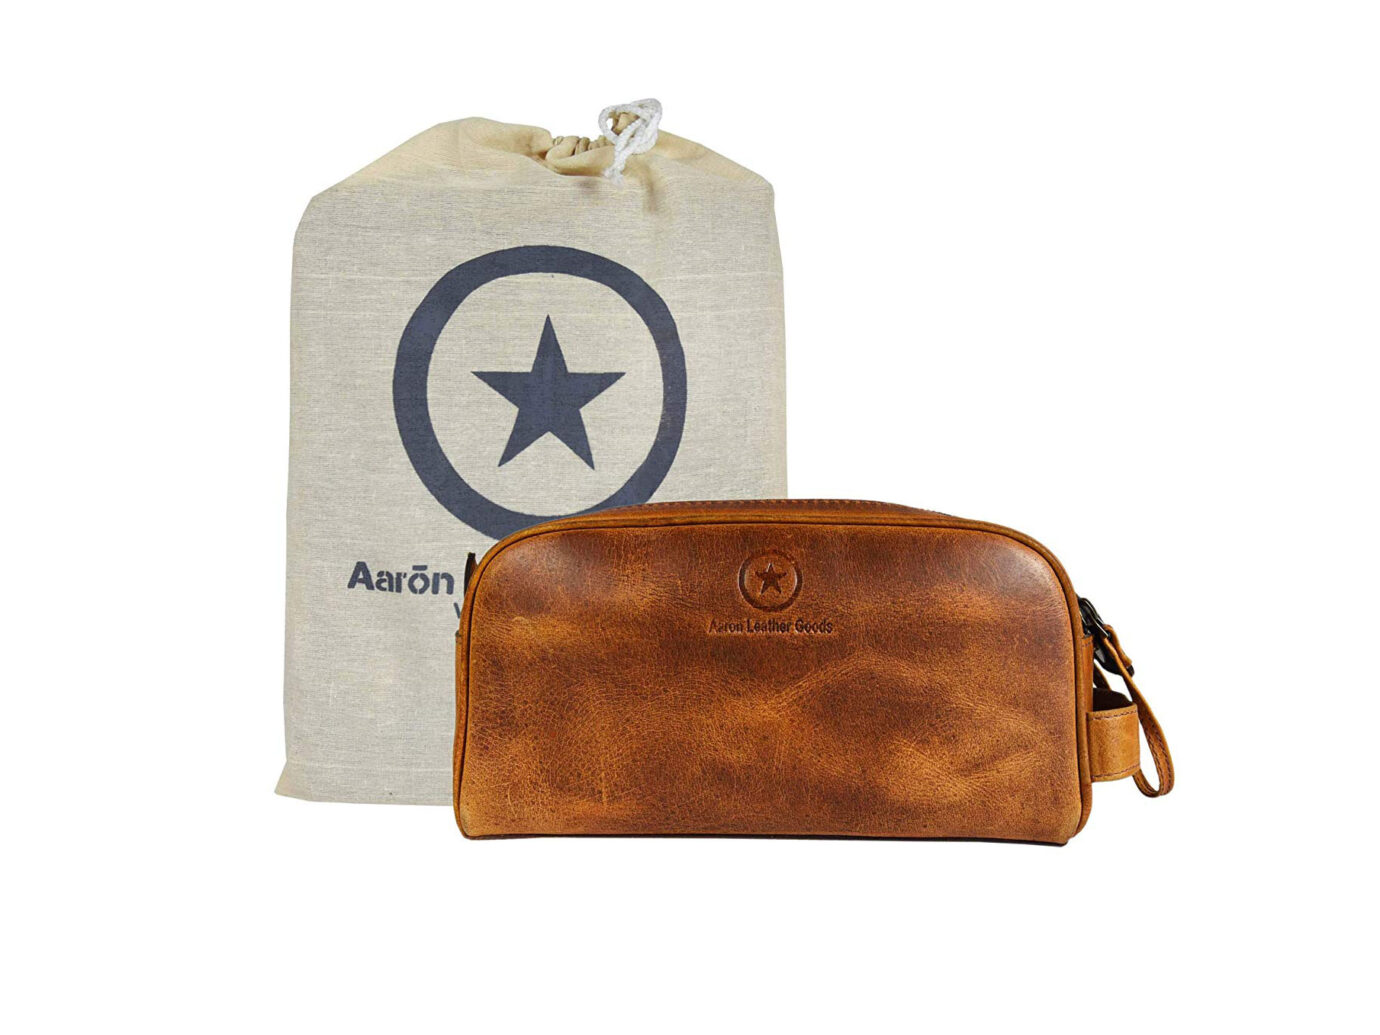 Aaron Leather Goods Toiletry Travel Pouch